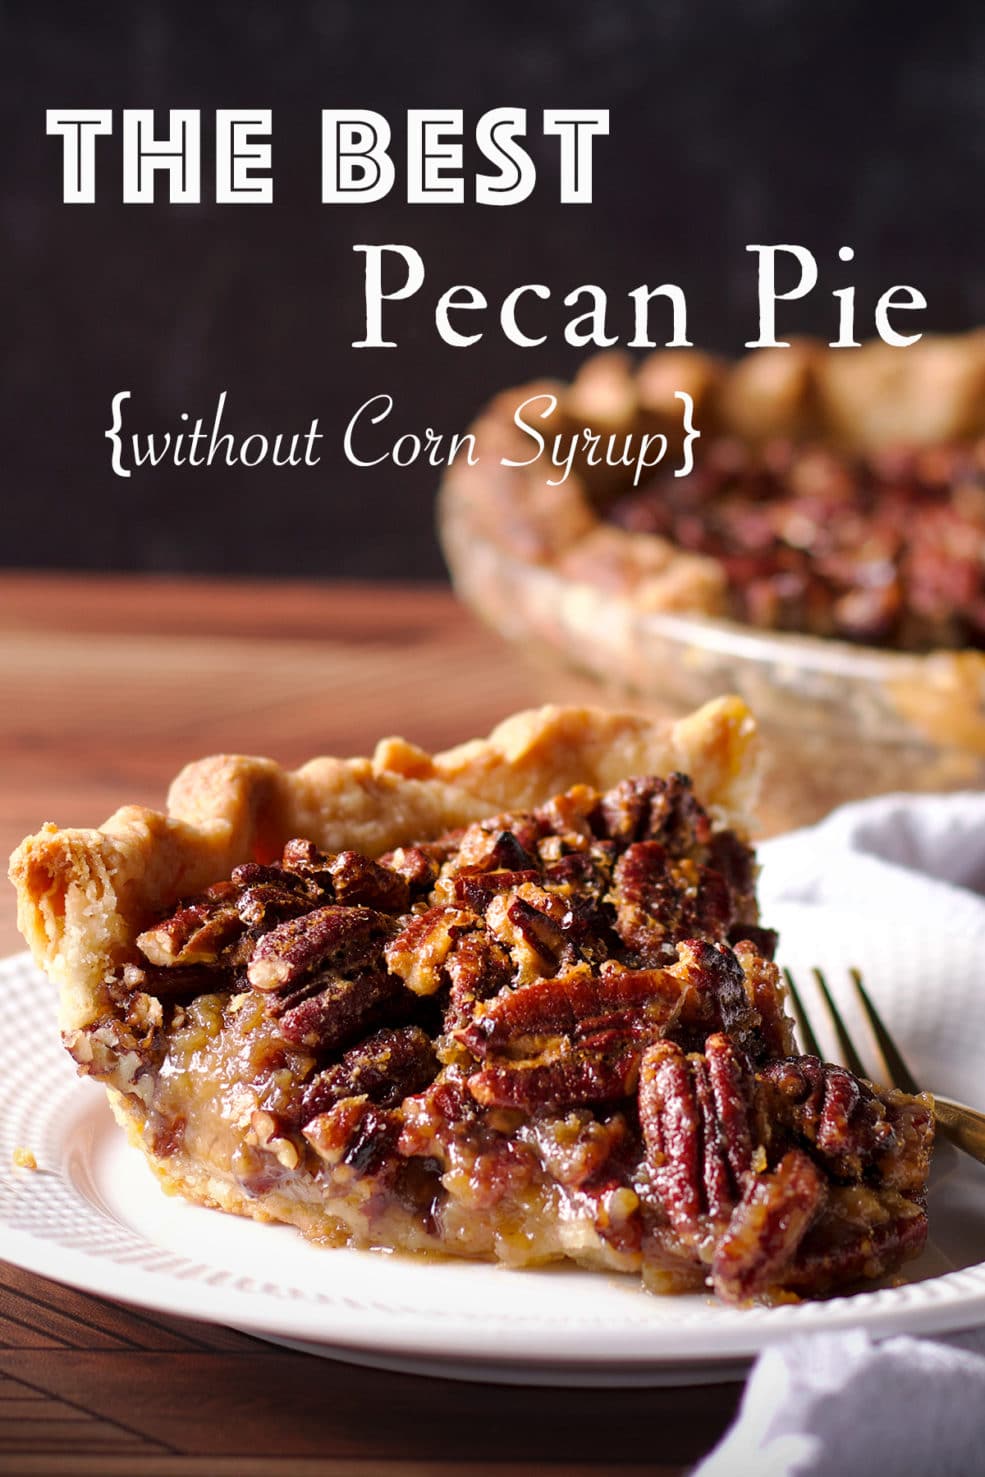 A slice of Pecan Pie made without corn syrup on a white plate.